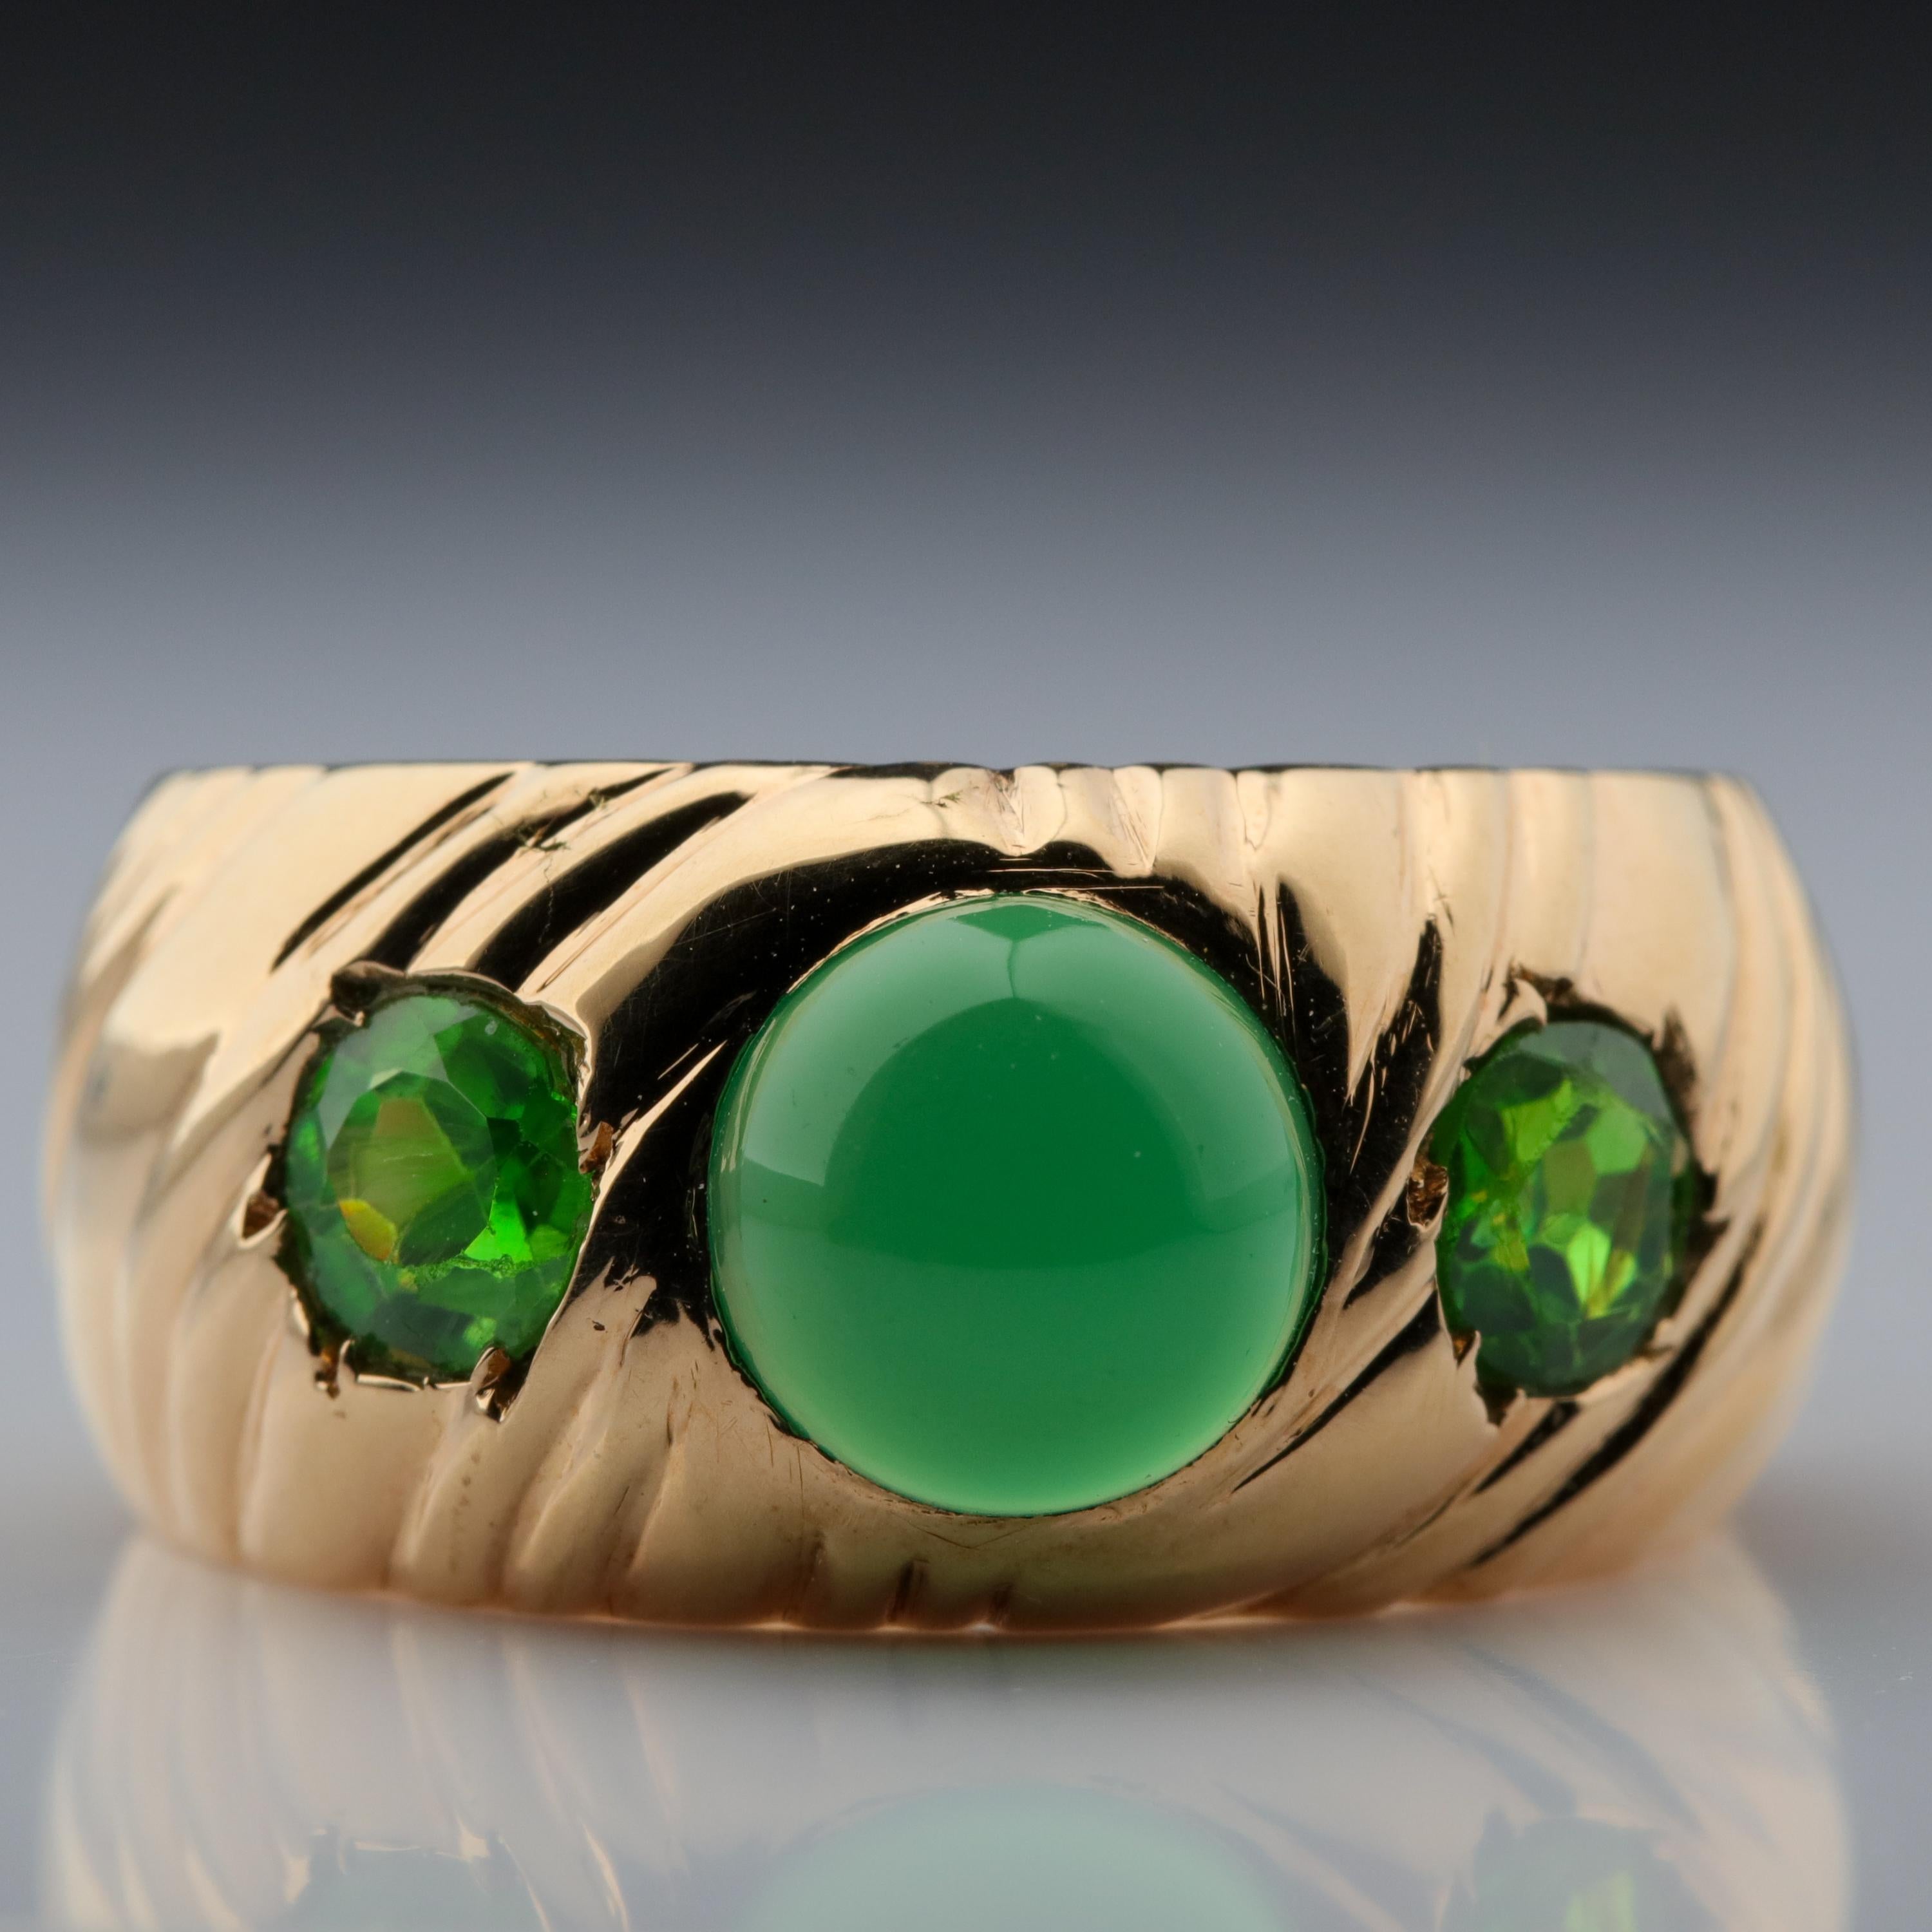 Hand-crafted in smooth, coppery-rose gold in Russia just around the turn of the century (circa 1890), this startlingly handsome and unique bias-ribbed cigar band ring is set with a central luminous, emerald-green chrysoprase cabochon measuring  7.47